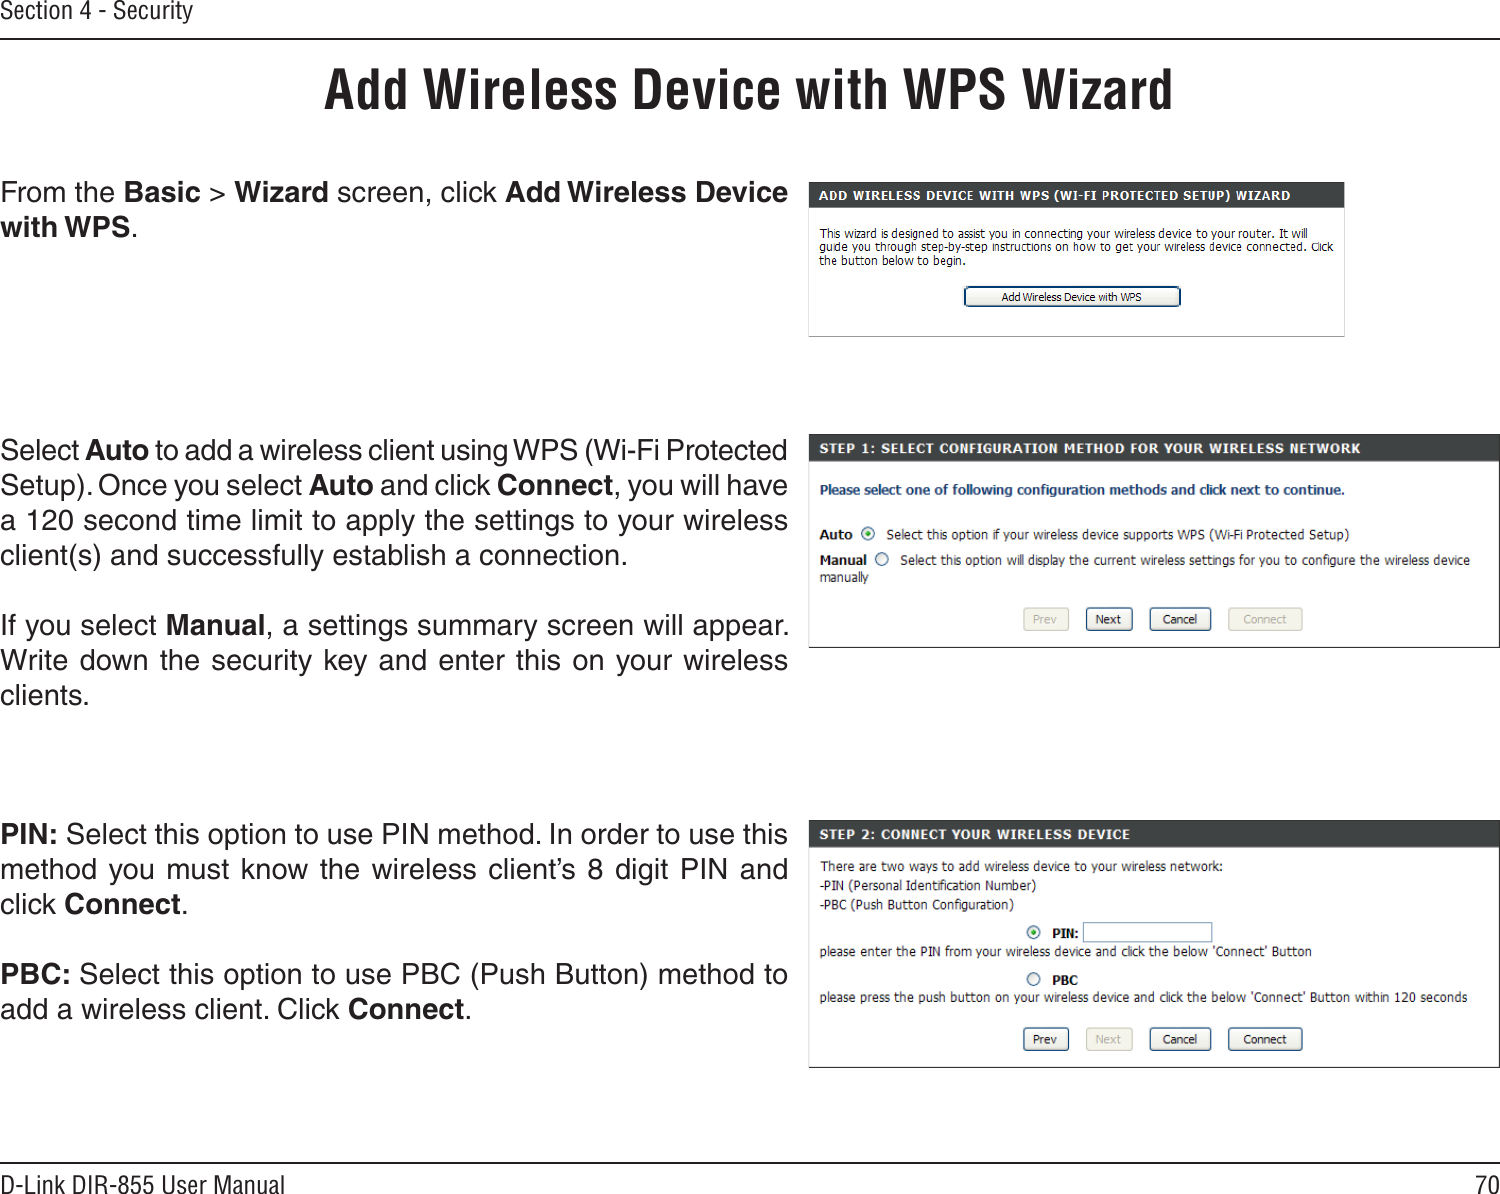 70D-Link DIR-855 User ManualSection 4 - SecurityFrom the Basic &gt; Wizard screen, click Add Wireless Device with WPS.Add Wireless Device with WPS WizardPIN: Select this option to use PIN method. In order to use this method you must know the  wireless  client’s 8 digit PIN and click Connect.PBC: Select this option to use PBC (Push Button) method to add a wireless client. Click Connect.Select Auto to add a wireless client using WPS (Wi-Fi Protected Setup). Once you select Auto and click Connect, you will have a 120 second time limit to apply the settings to your wireless client(s) and successfully establish a connection. If you select Manual, a settings summary screen will appear. Write down the security key and enter this on your wireless clients. 